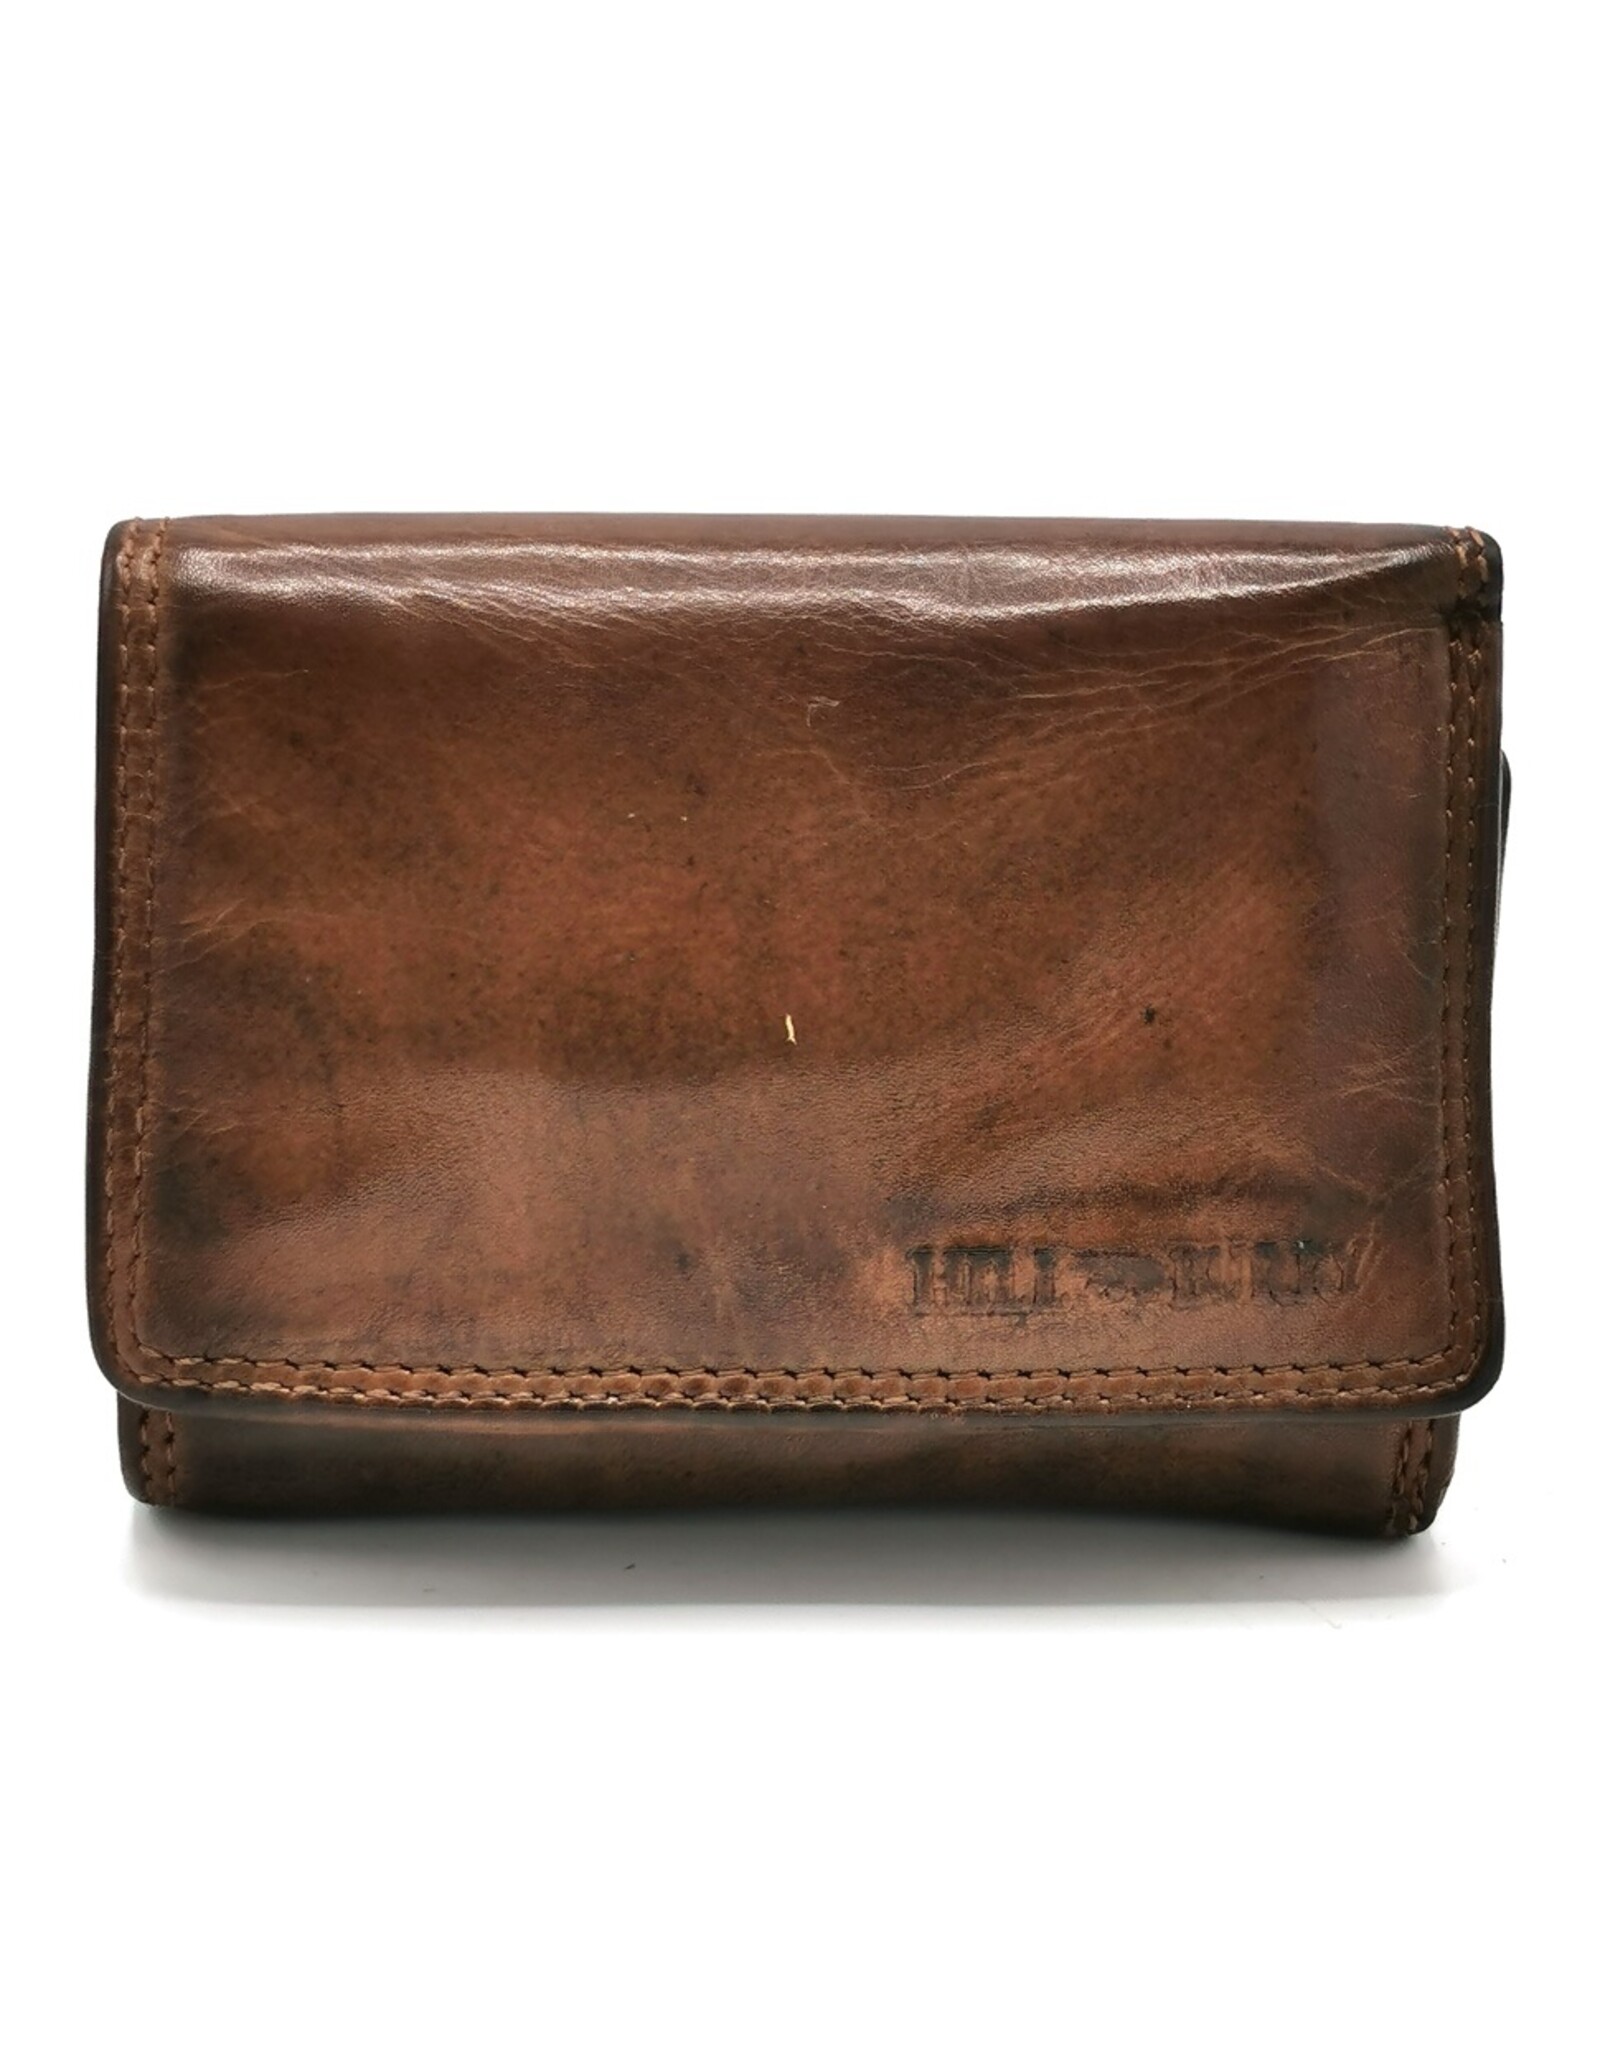 HillBurry Leather wallets - Hillburry Wallet Washed Leather Brown Medium